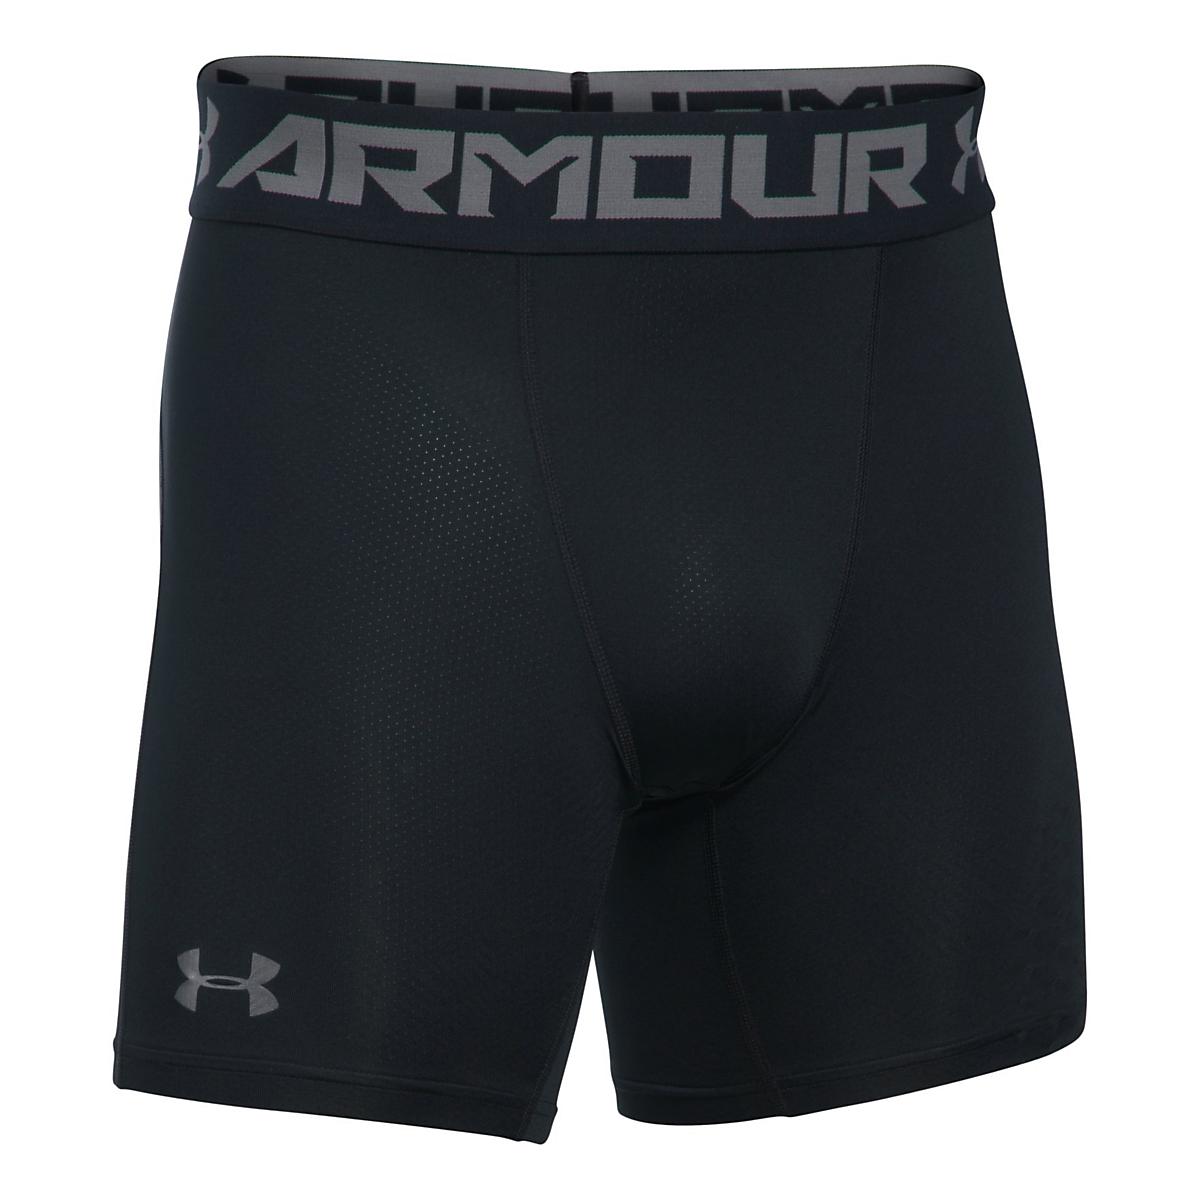  Under Armour Workout Underwear for Fat Body